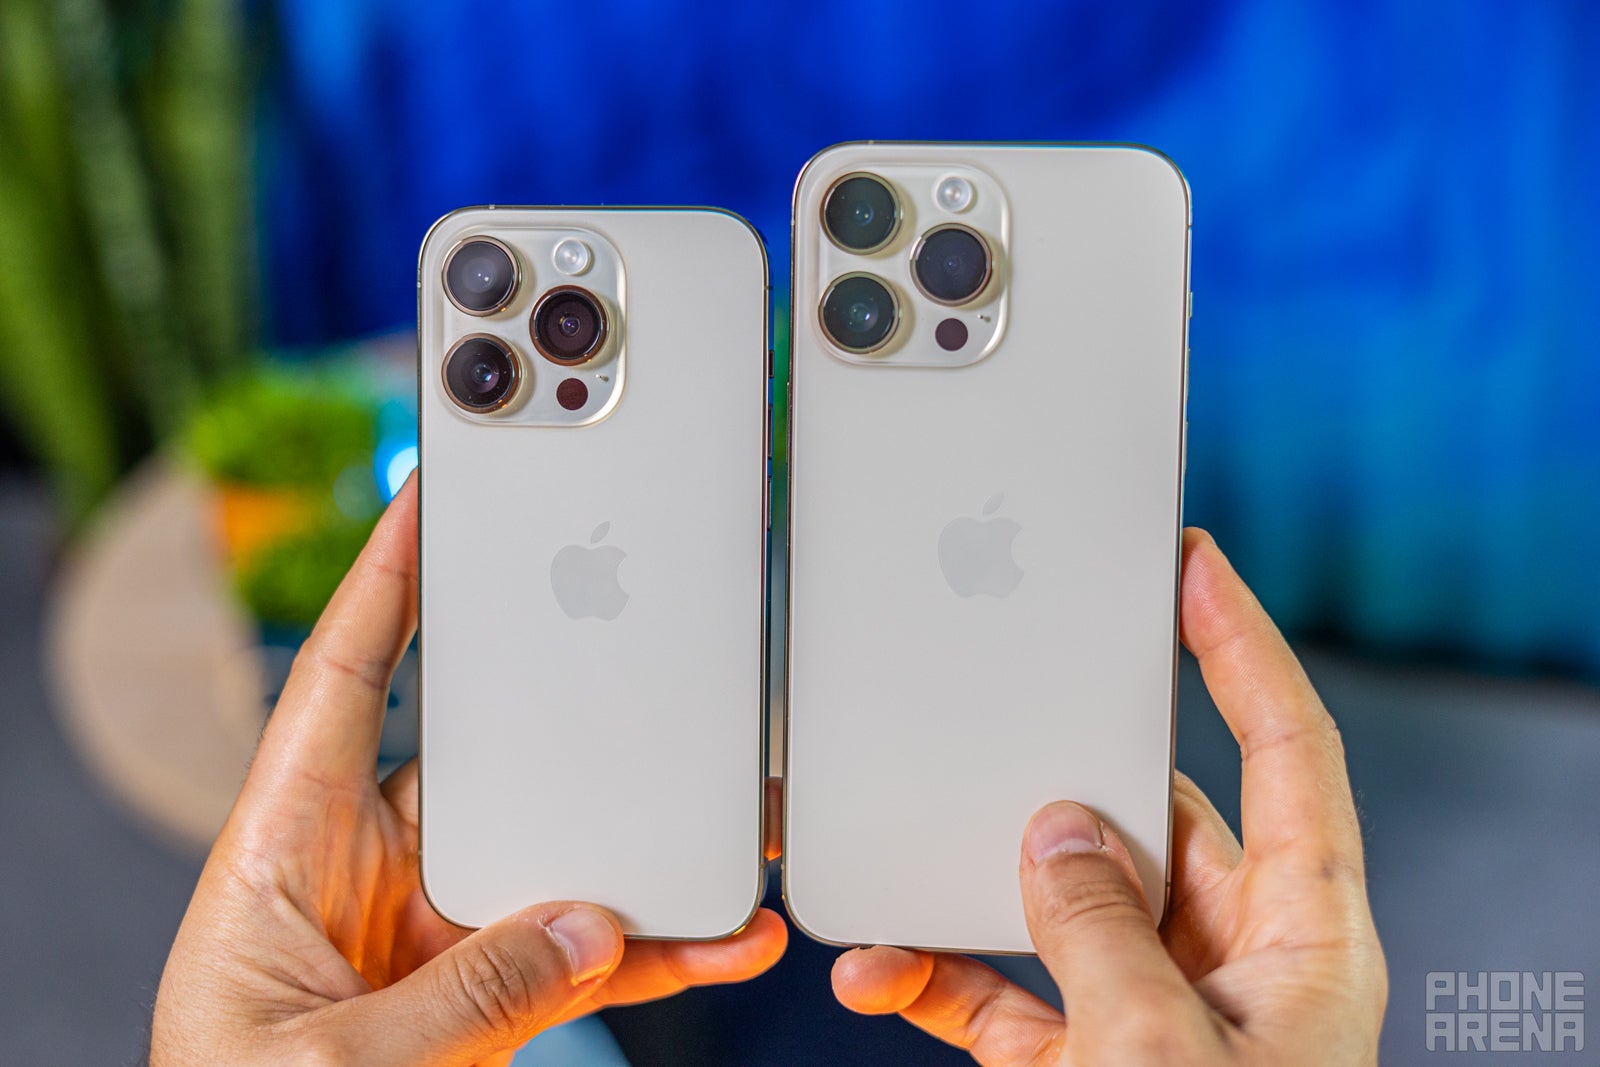 A much better chip than the regular iPhones can be found inside these two (Image Credit - PhoneArena) - Apple iPhone 14 Pro Max vs iPhone 14 Pro: The itch to switch